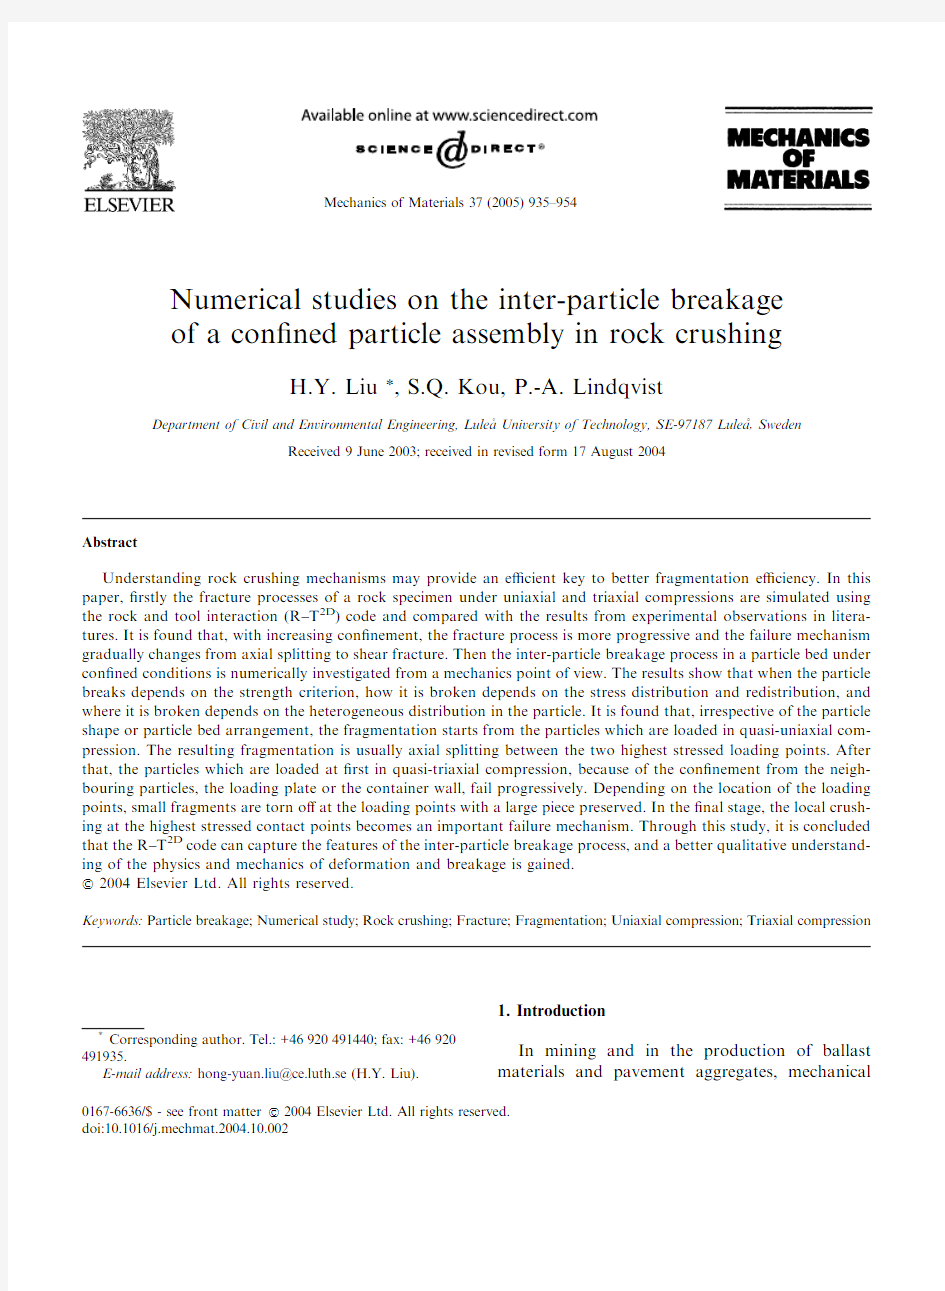 Numerical studies on the inter-particle breakage of a confined particle assembly in rock crushing